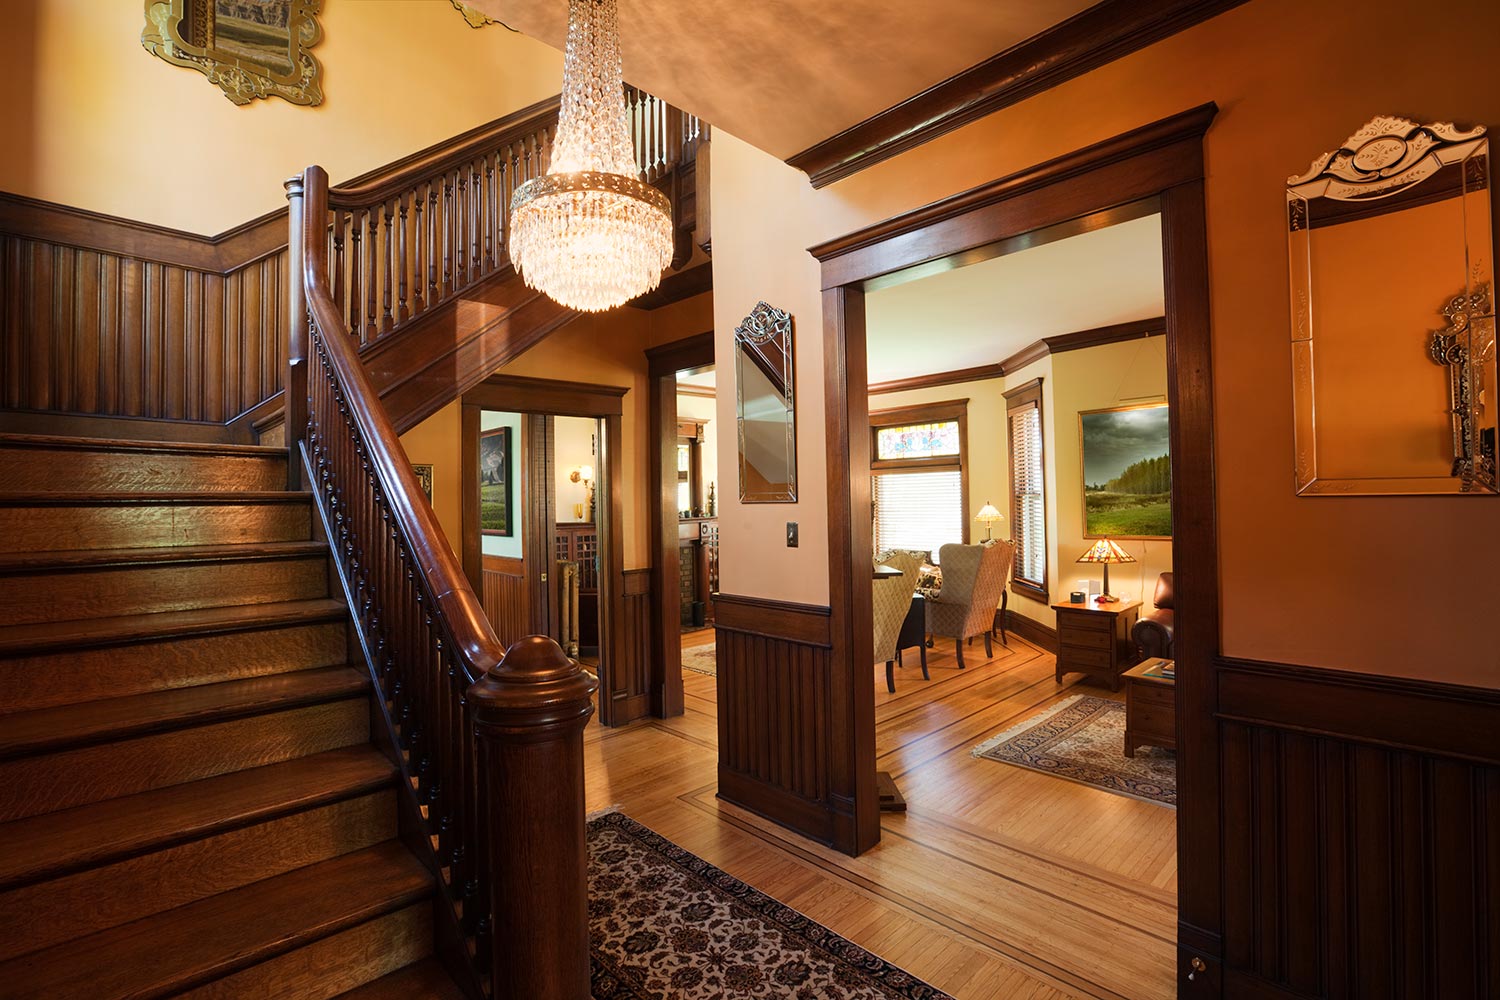 Entryway of an old restored Victorian style home